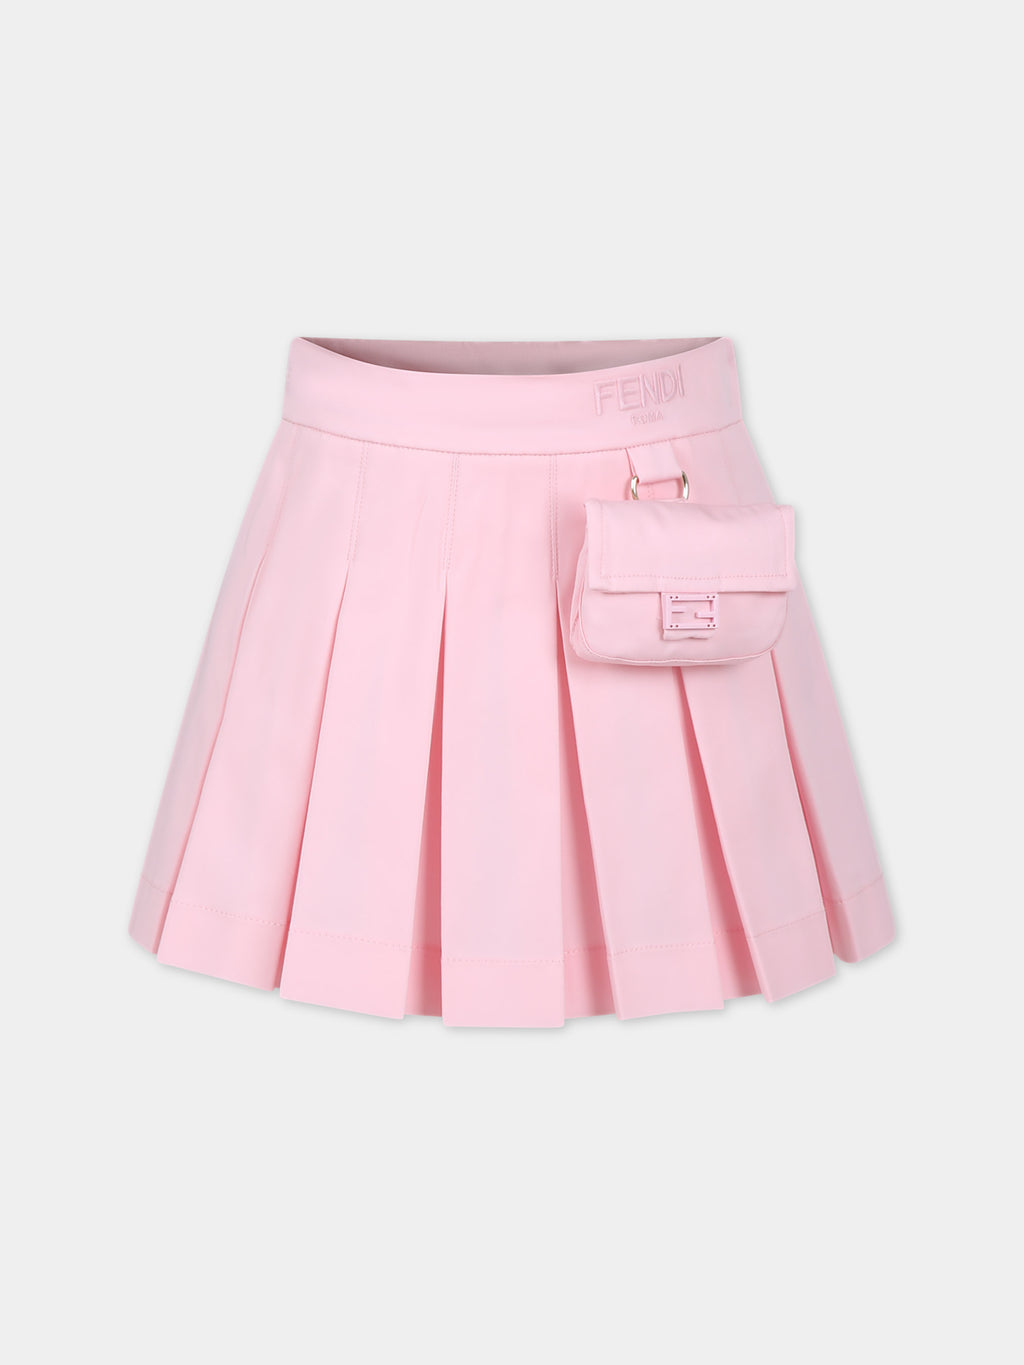 Pink skirt for girl with Fendi logo and baguette